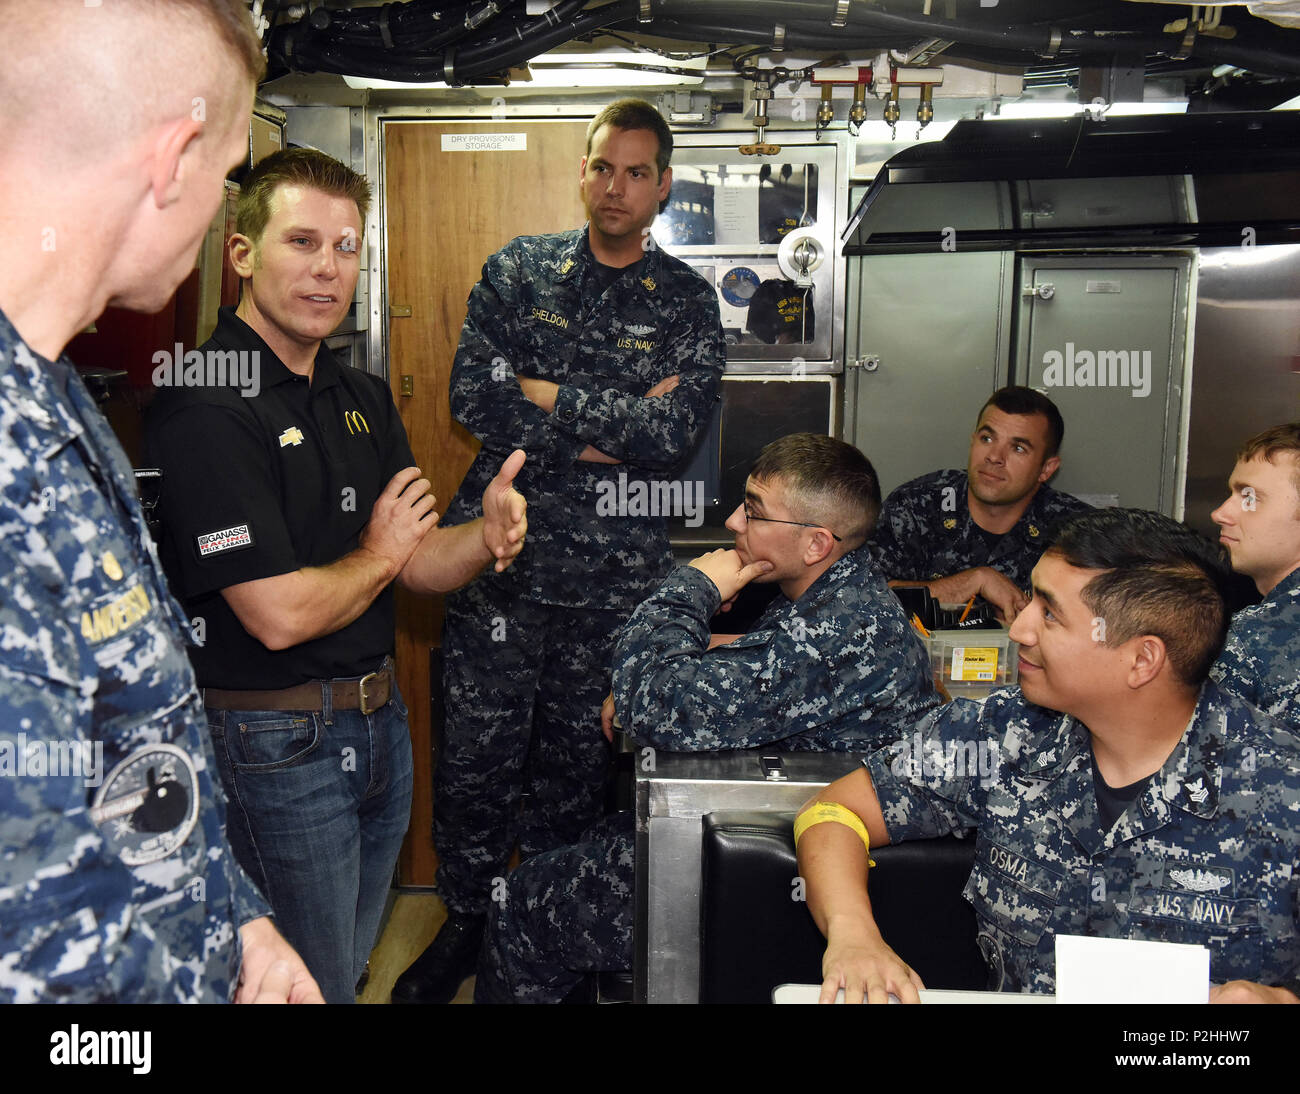 160922-N-SB201-071 GROTON, Conn. (Sept. 22, 2016) Jamie McMurray, driver of the McDonald’s number 1 car for Chip Ganassi Racing, answers questions from USS Virginia (SSN-774) crewmembers in the crew’s mess during a tour of the nuclear-powered, fast-attack submarine. USS Virginia, first-in-class of the Virginia-class of fast-attack submarines is homeported at Naval Submarine Base New London. (U.S. Navy Photo by Chief Mass Communication Specialist(SW/AW) Steve Owsley/Released). Stock Photo